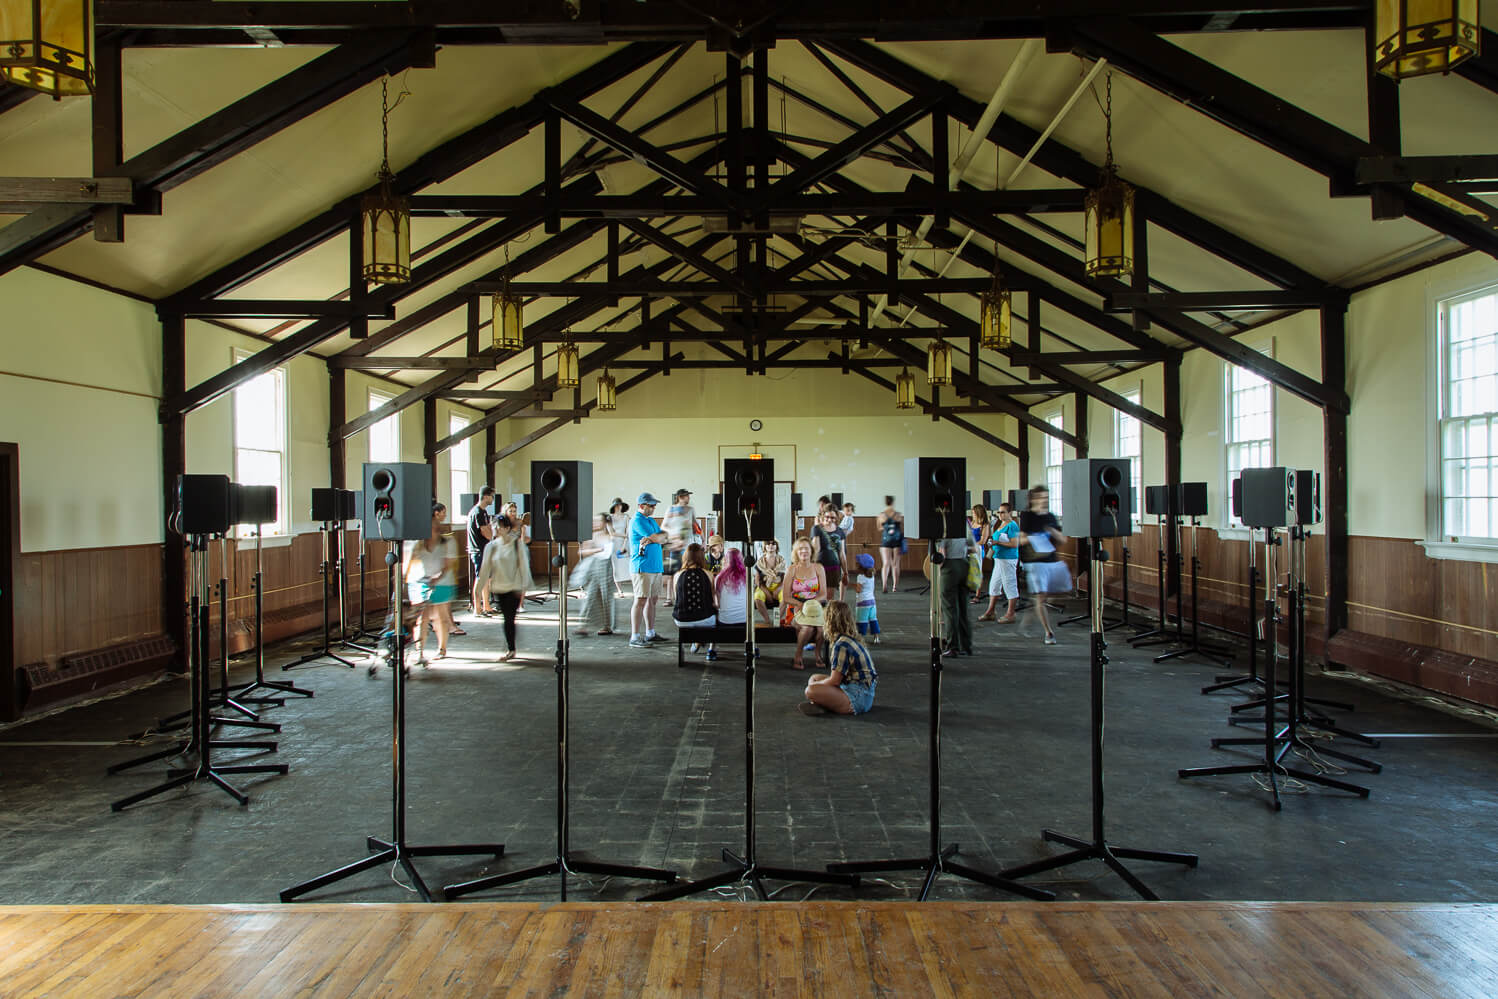 Installation view of Janet Cardiff’s <em>The Forty Part Motet</em> as part of <em>Rockaway!</em> on view at Gateway National Recreation Area at Fort Tilden from June 29 to September 1, 2014. Courtesy of MoMA PS1 © 2014. Photo: Pablo Enriquez.